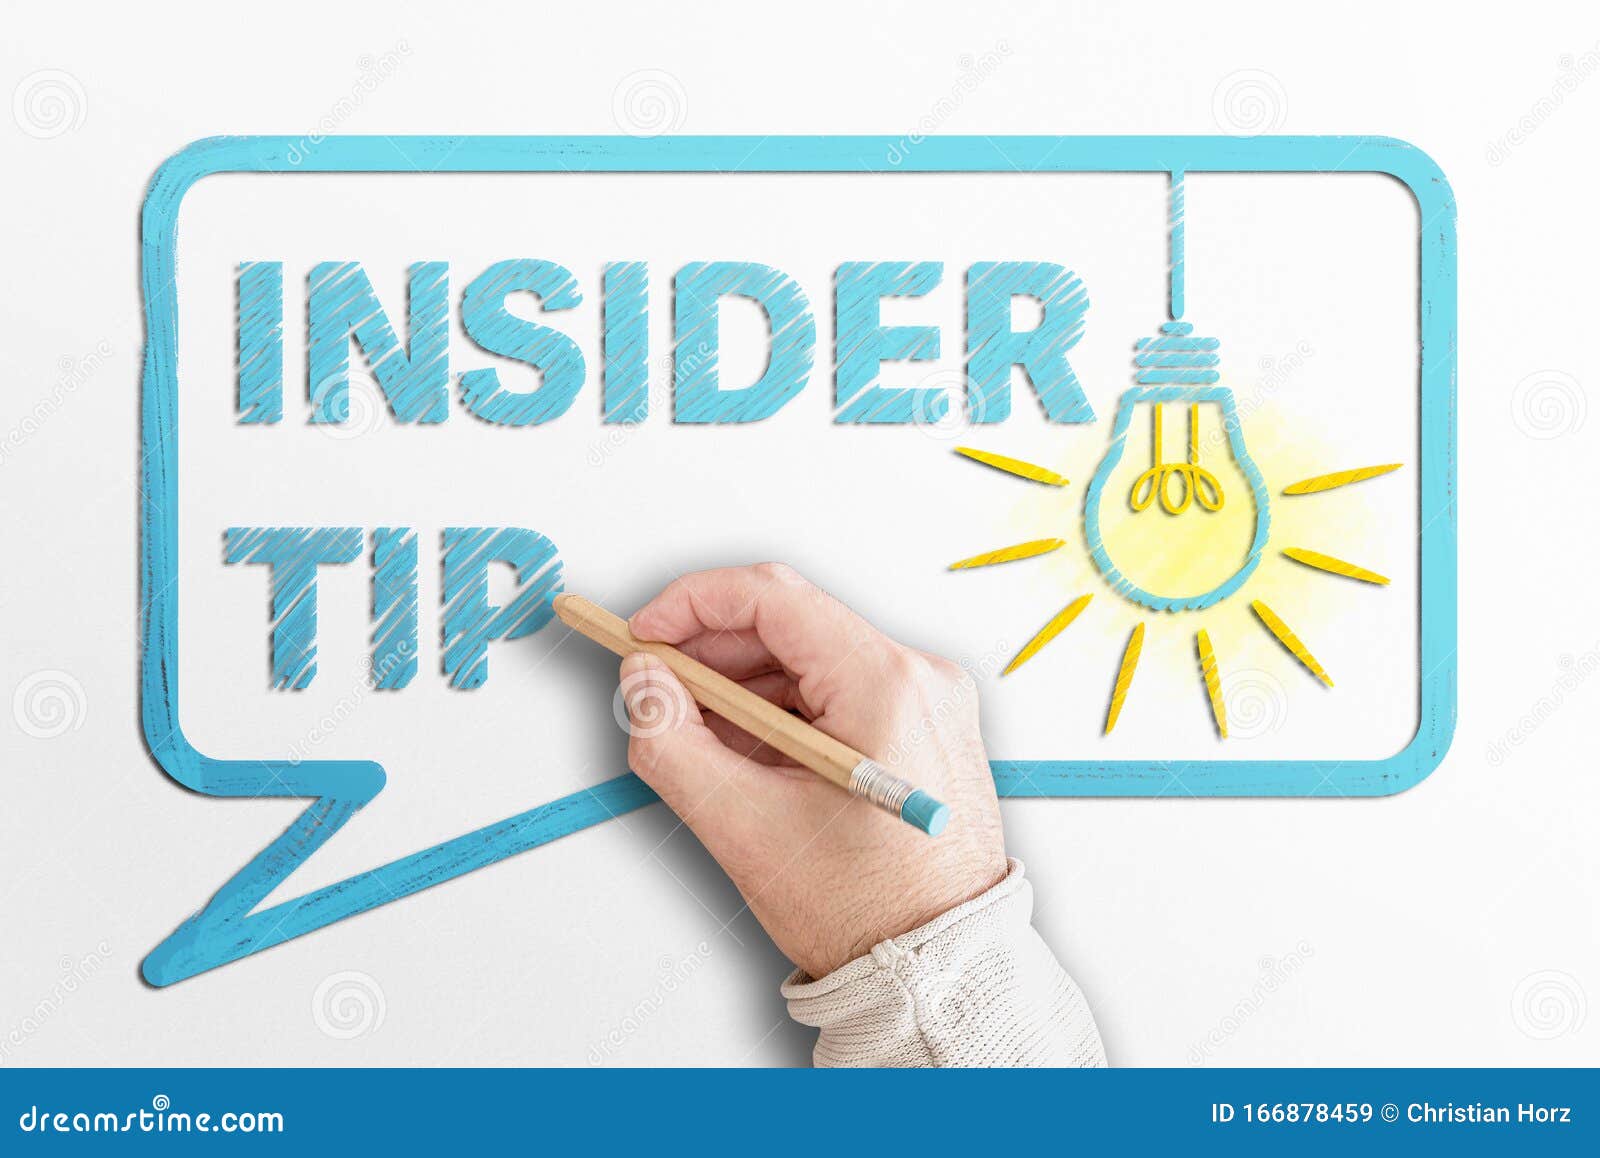 words insider tip in speech bubble with glowing light bulb